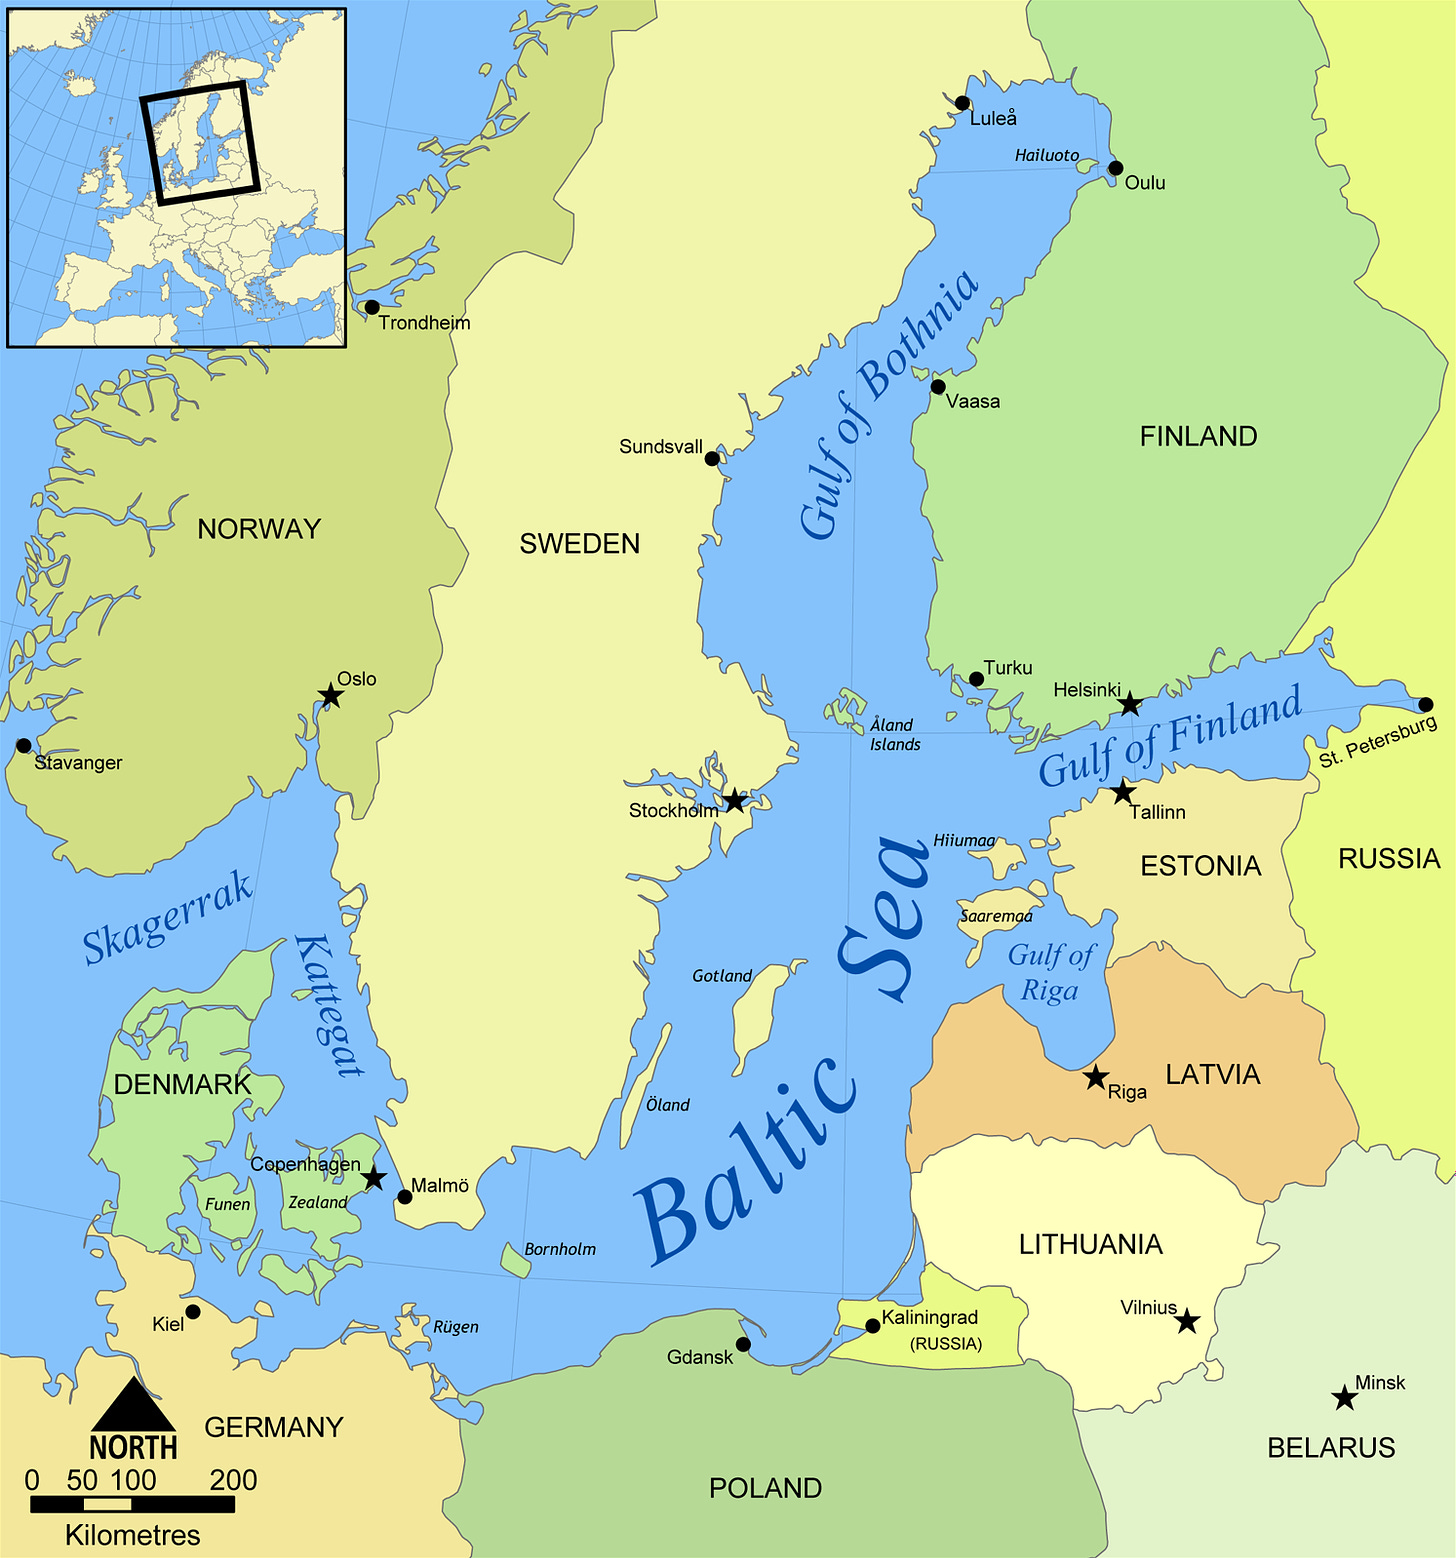 Map of the Baltic Sea region (Image: NormanEinstein, CC BY-SA 3.0, via Wikimedia Commons)